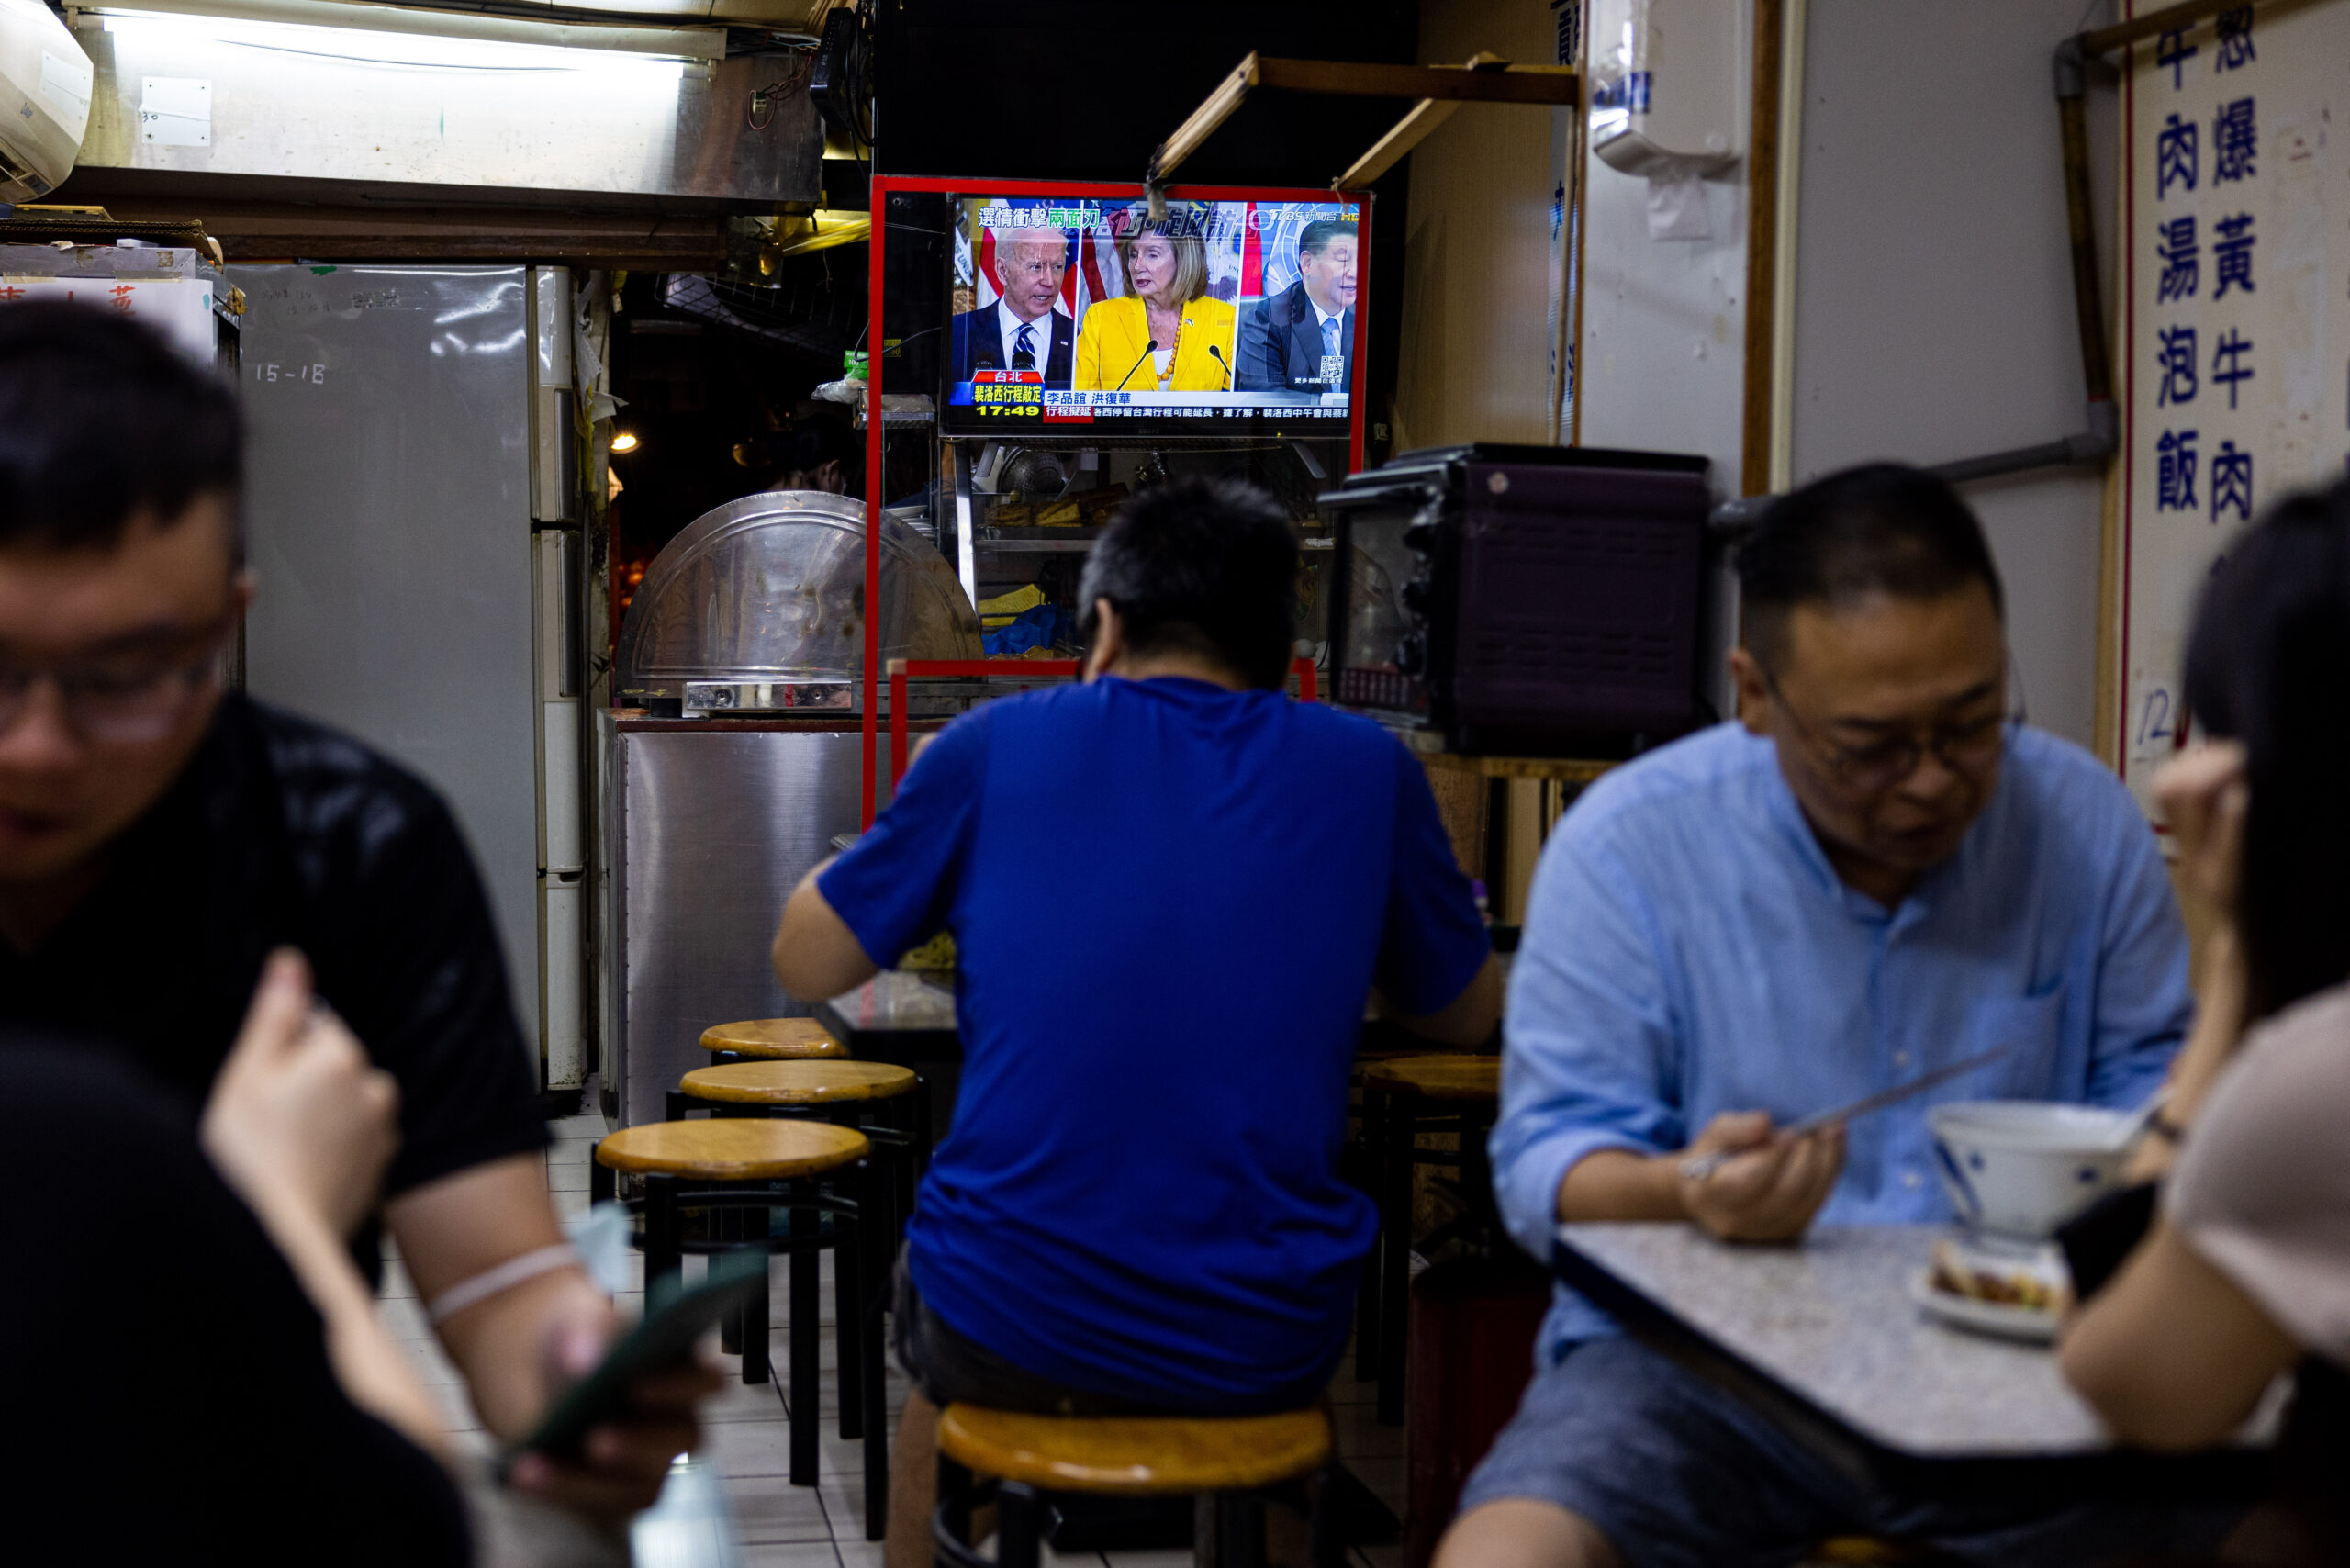 Photograph in restaurant in Taiwan broadcasting TV news of Pelosi's August 2022 visit